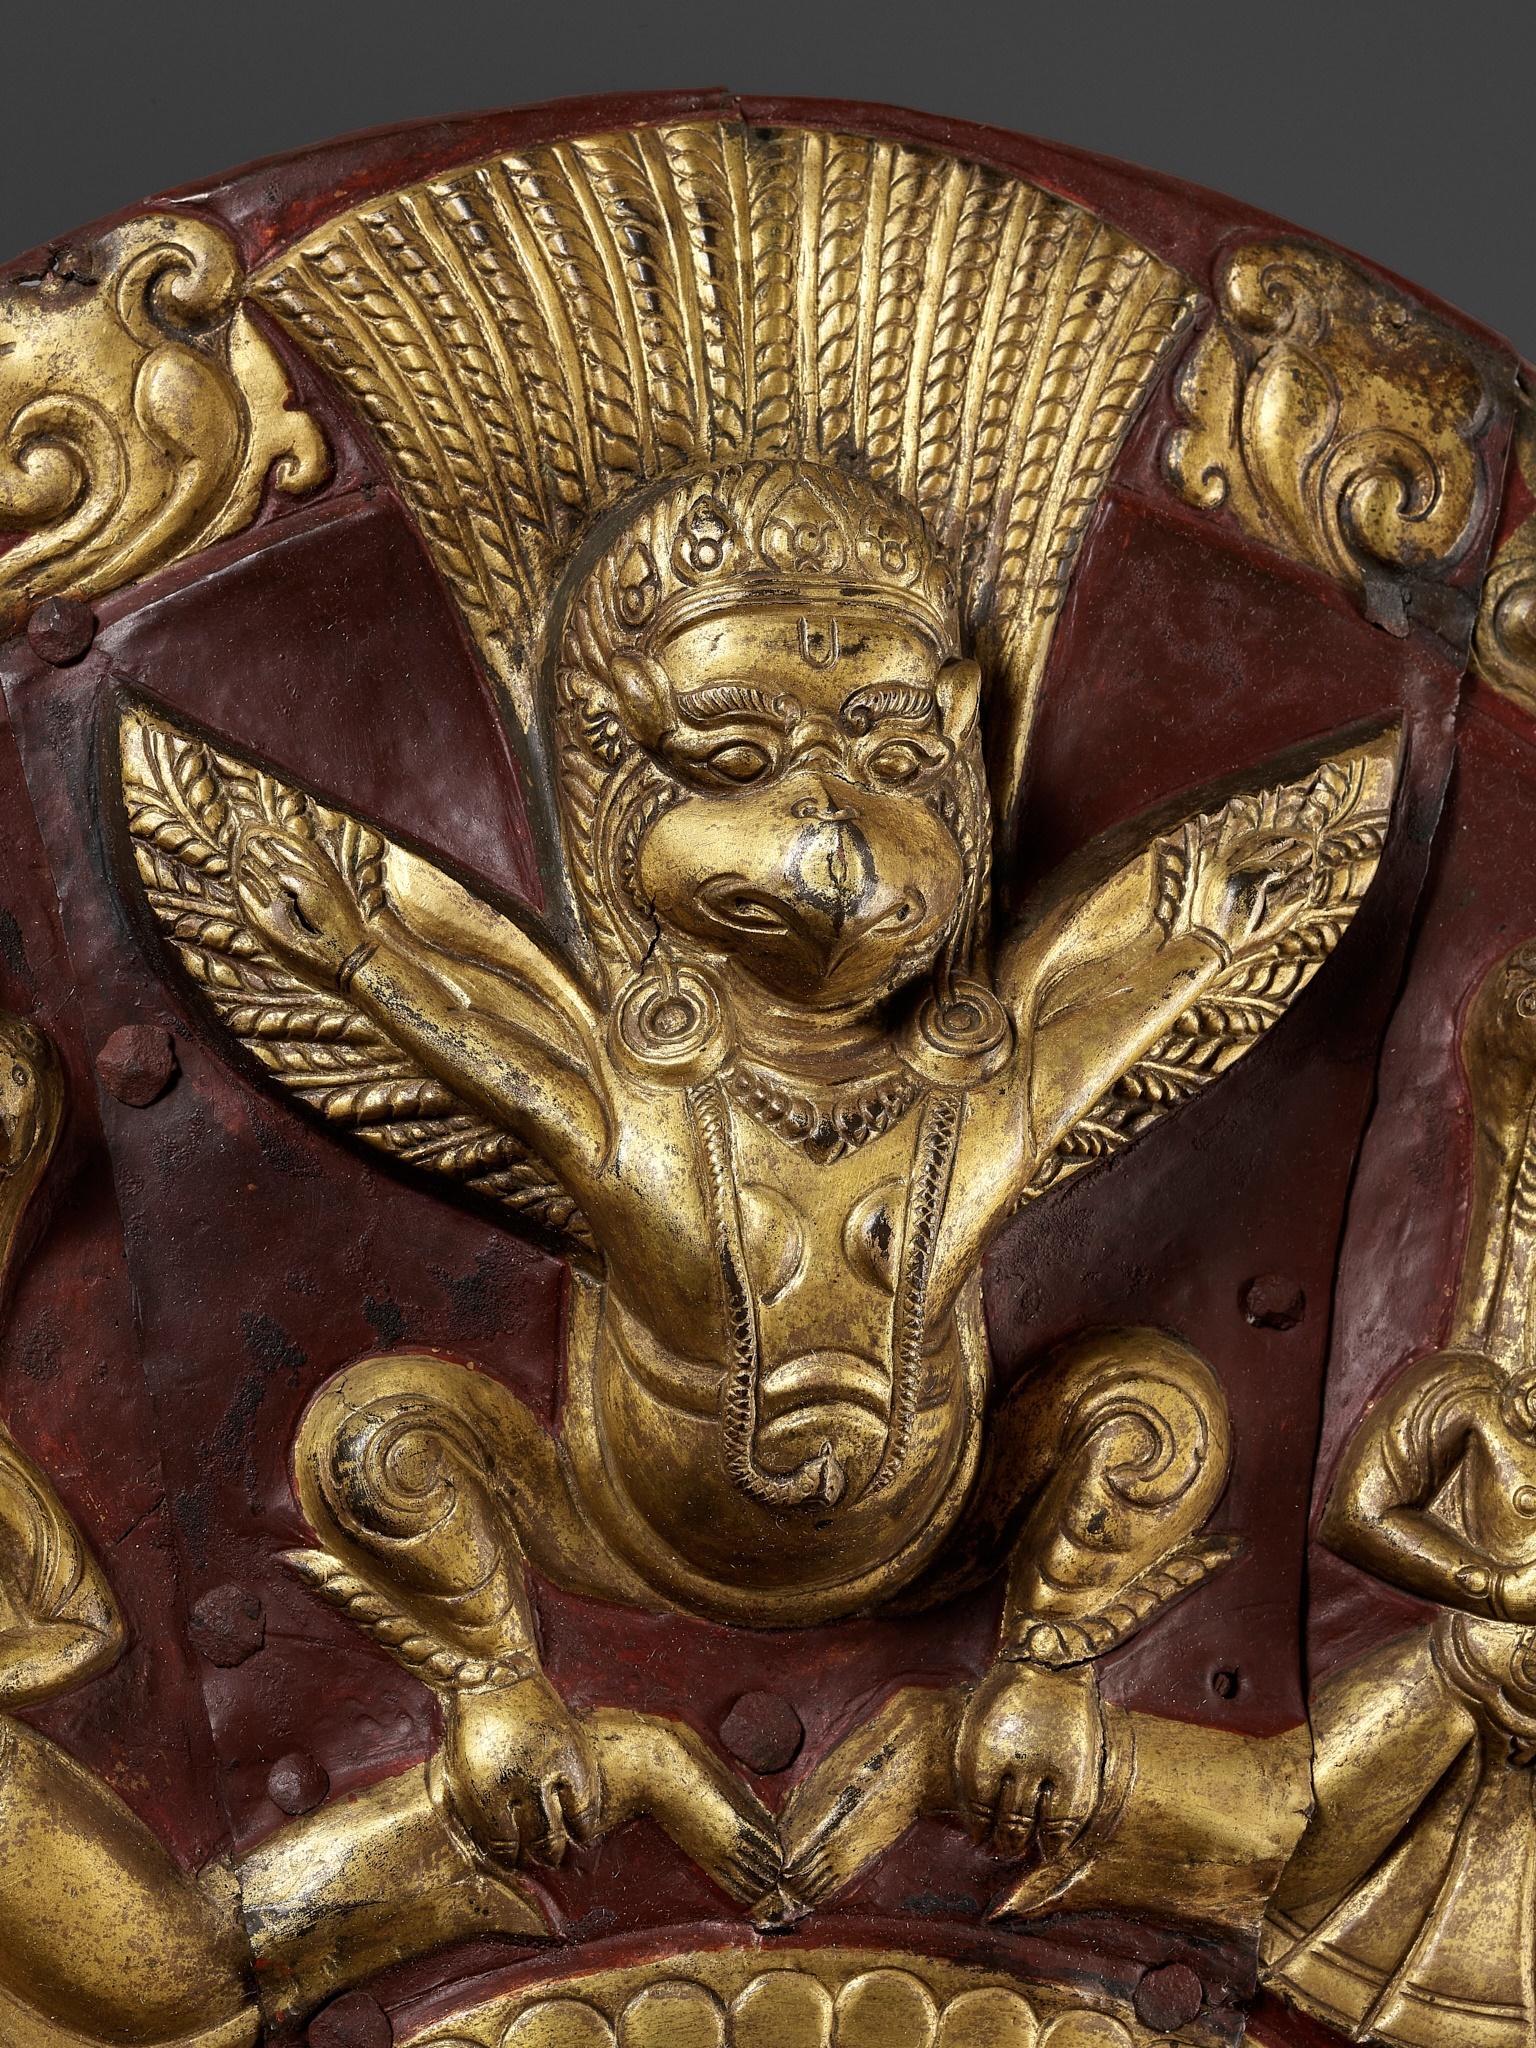 A LARGE GILT AND LACQUERED COPPER REPOUSSE TORANA, NEPAL, 17TH-18TH CENTURY - Image 9 of 9